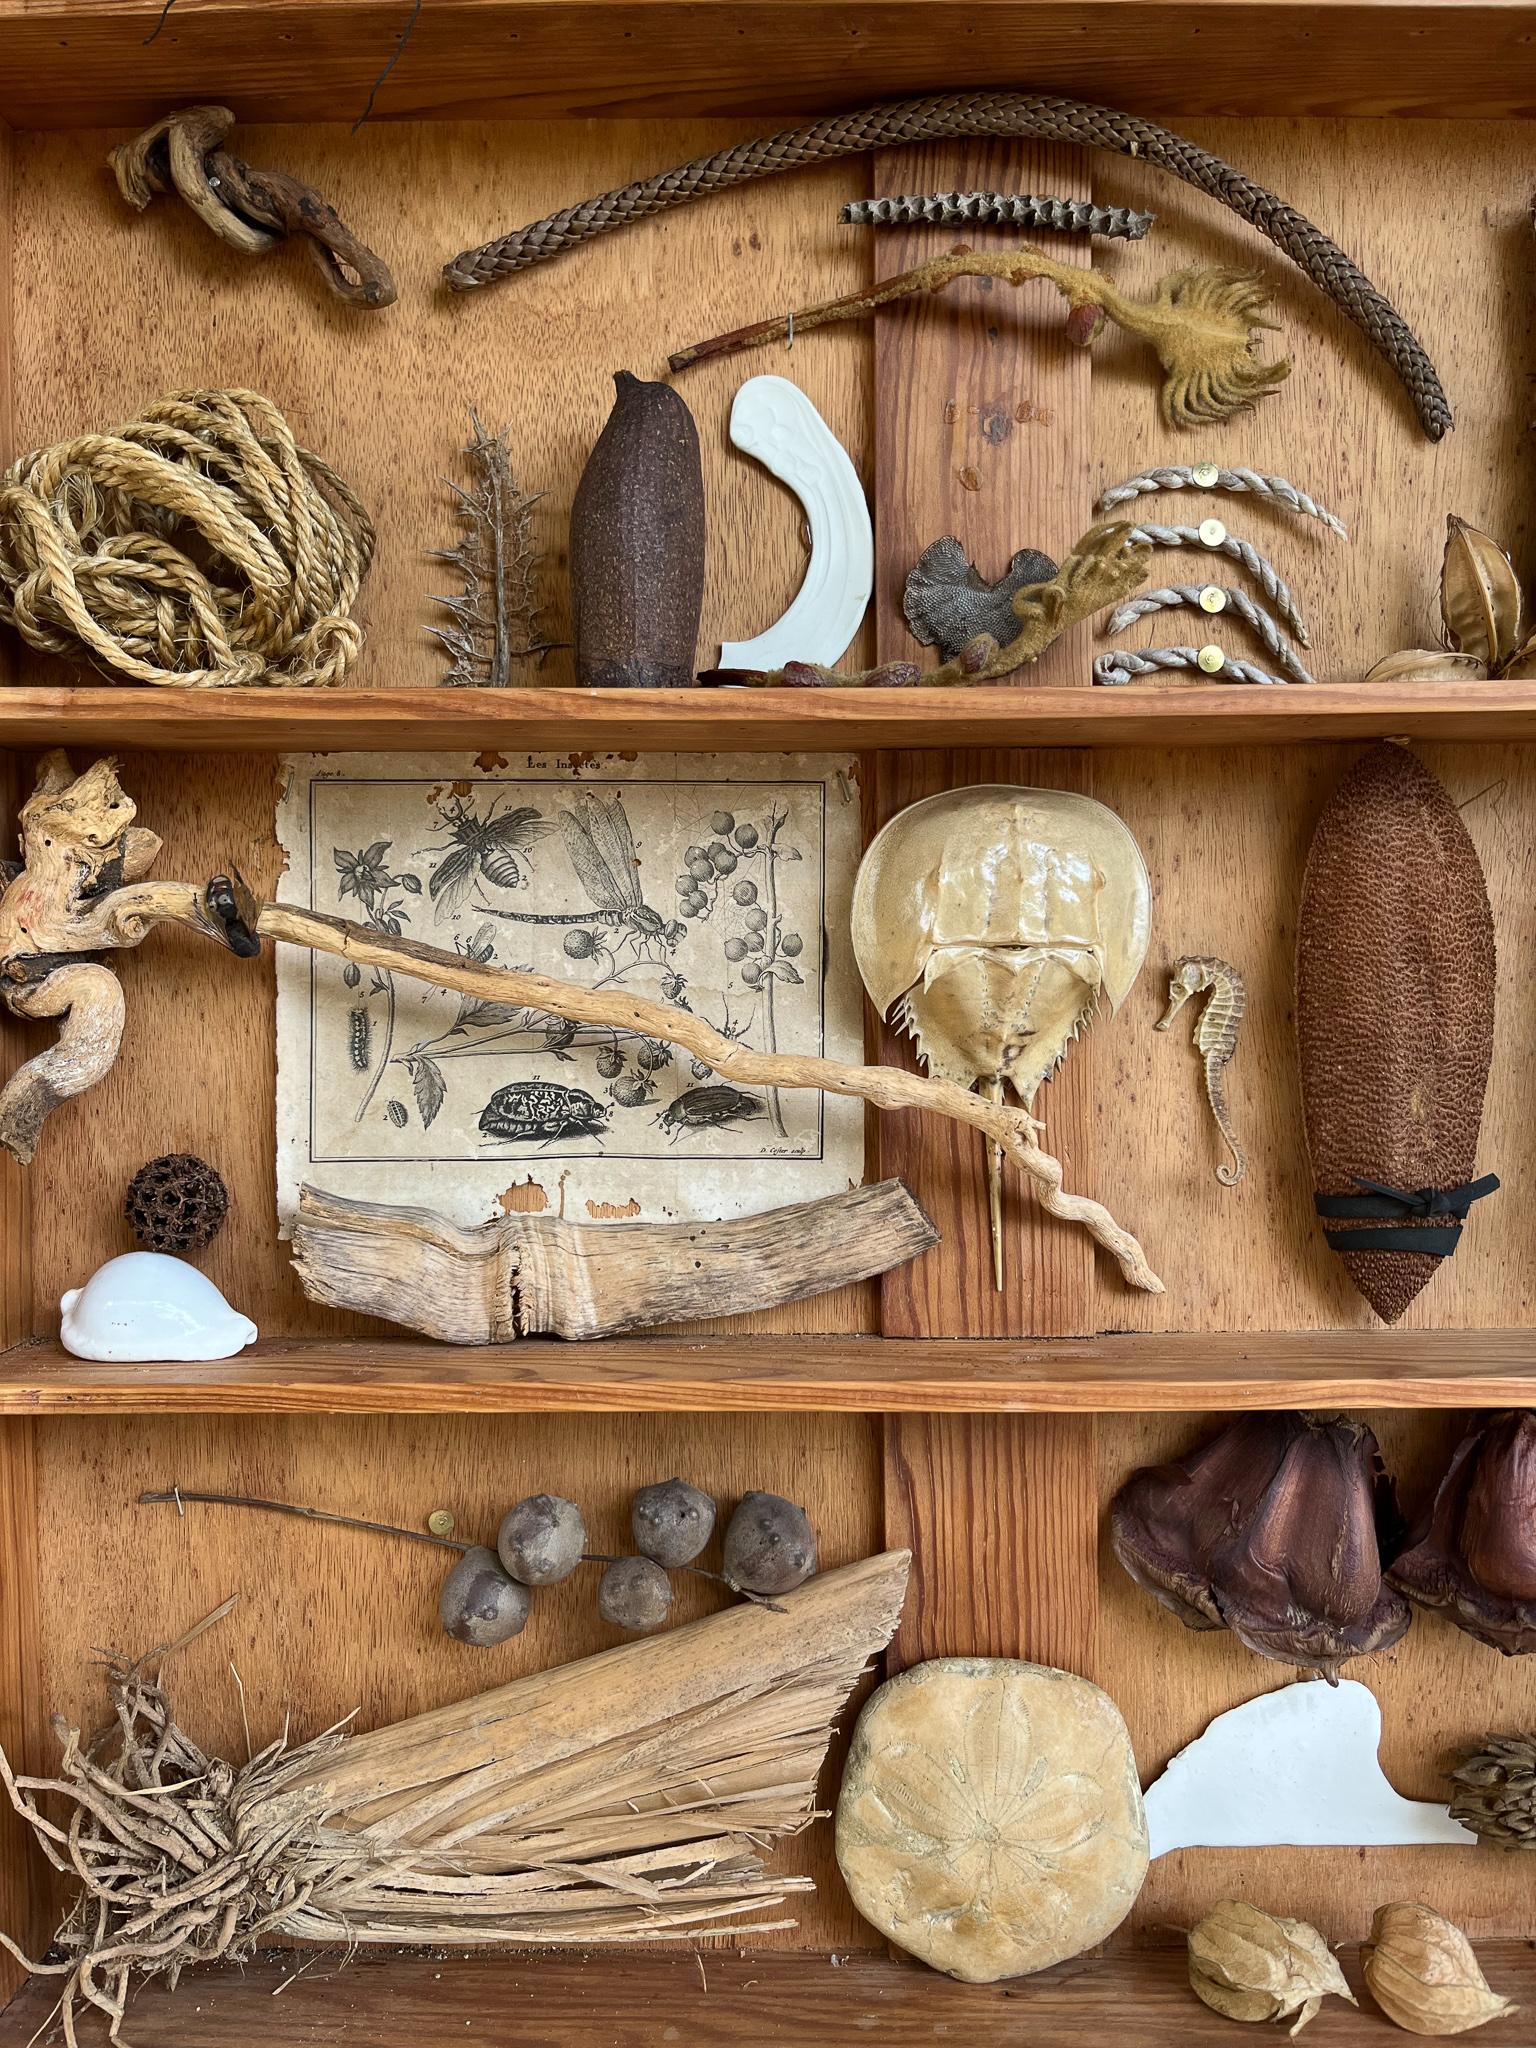 Contemporary Cabinets of Curiosities by Teresa Lacerda